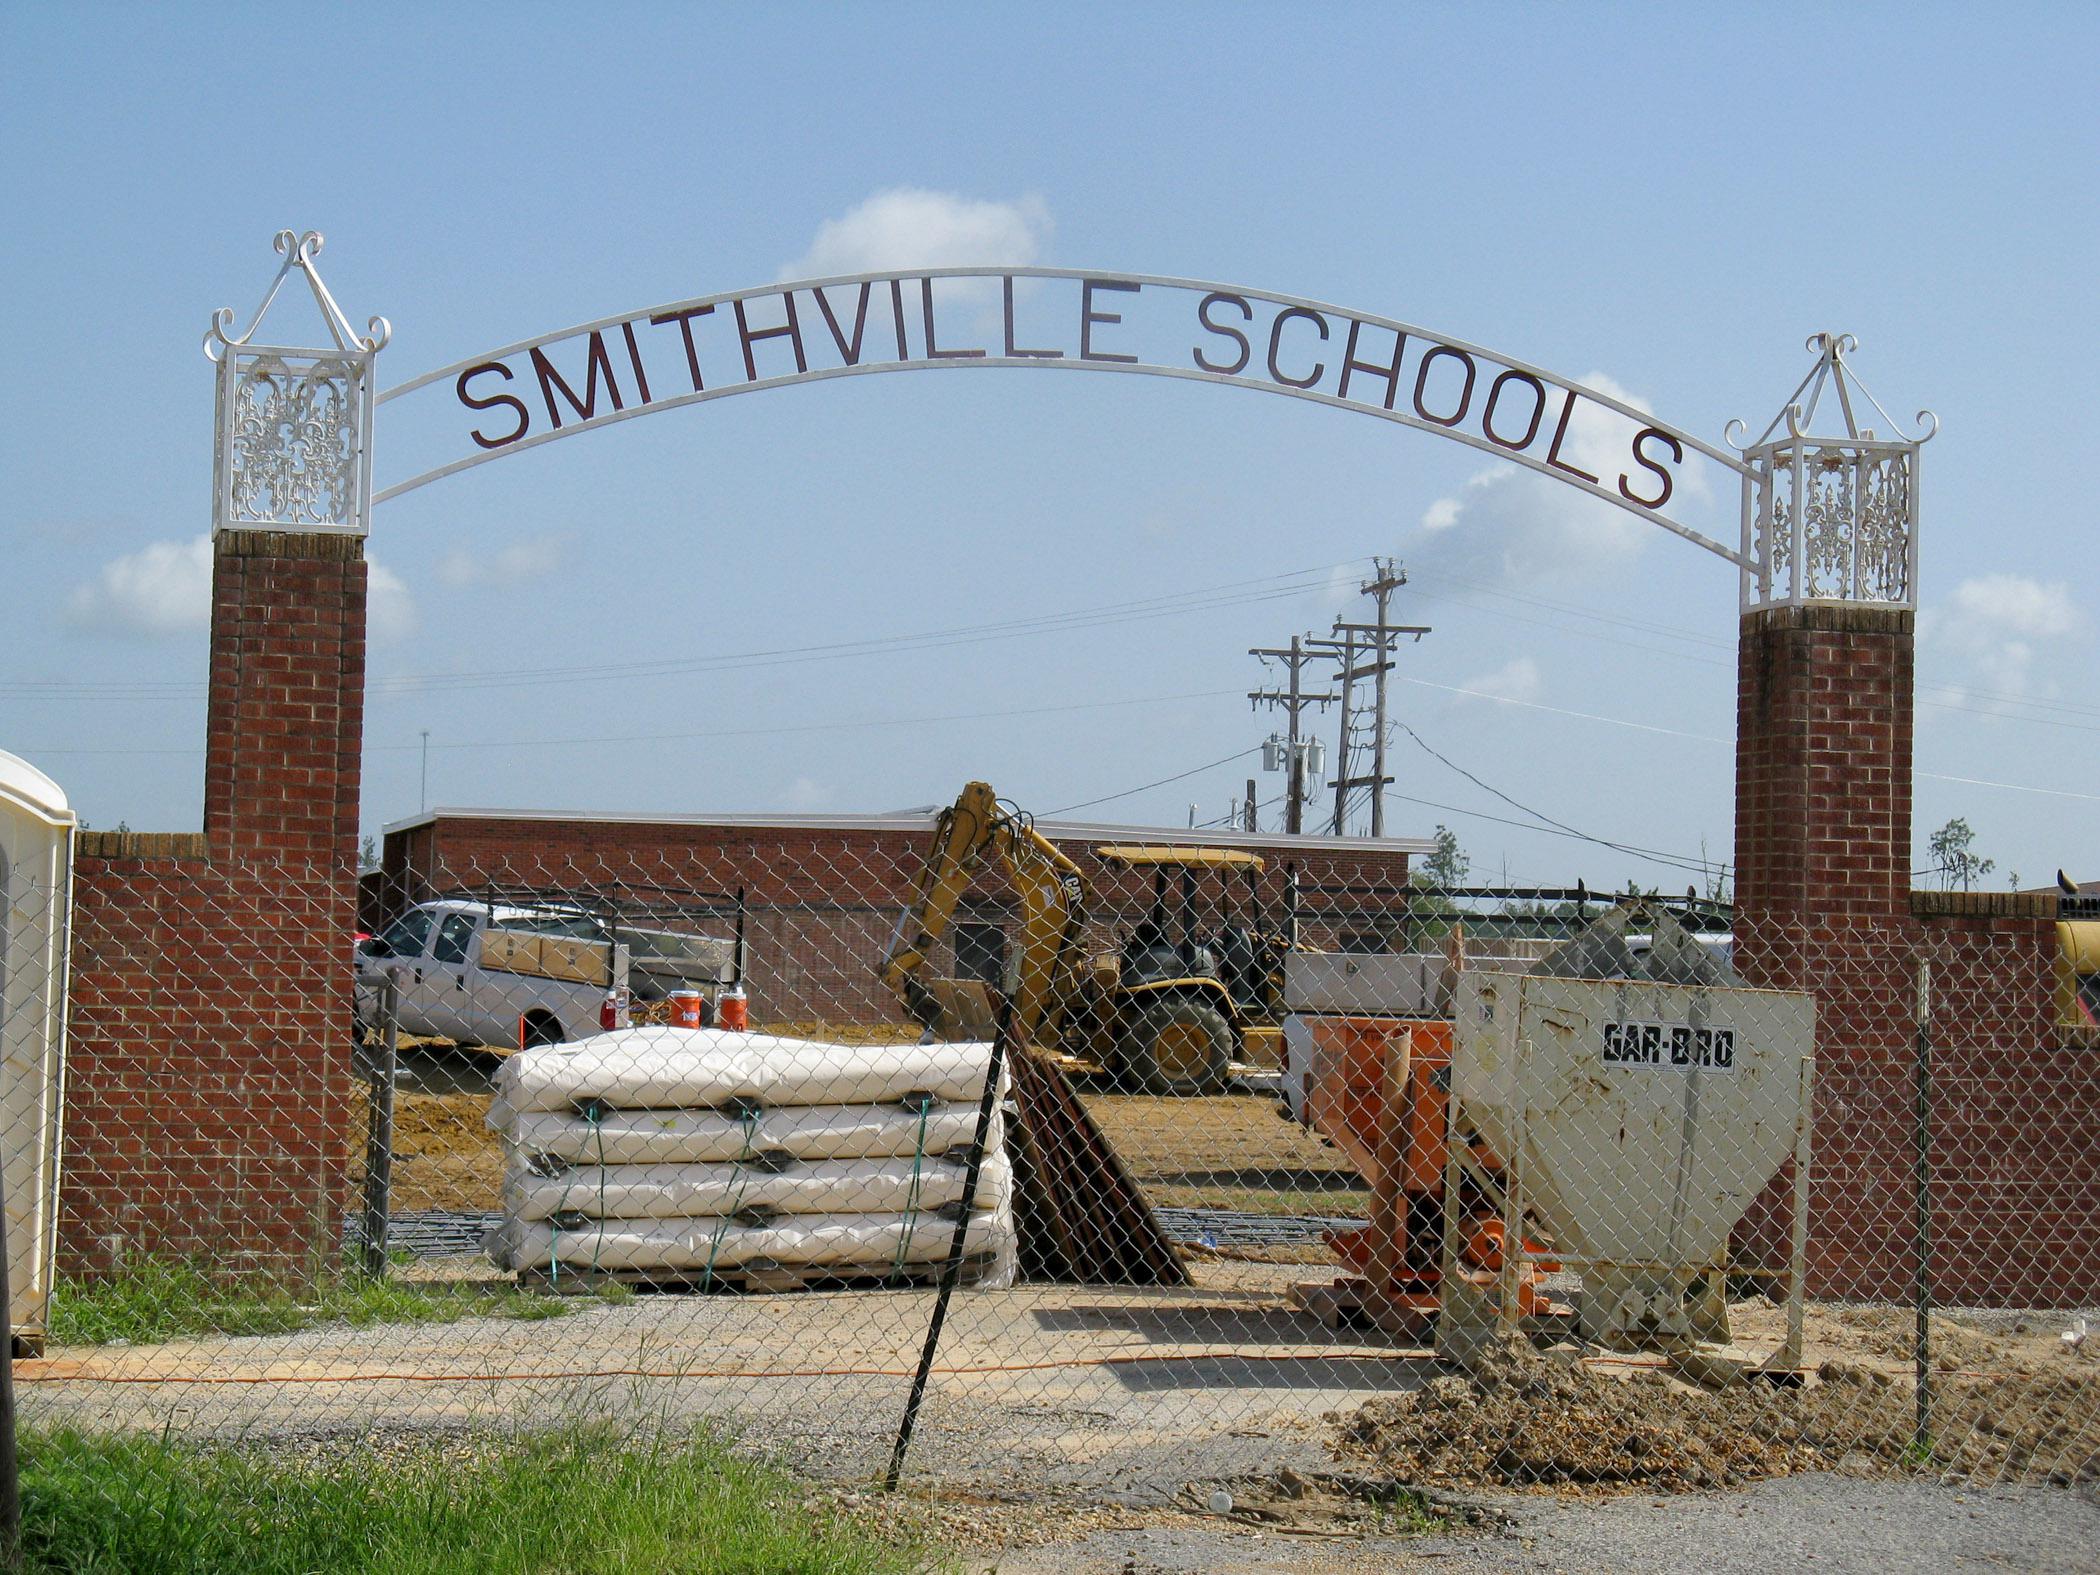 While Smithville Schools are under construction due to tornado damage, teachers hold classes in temporary buildings and use computers donated by several organizations, including the Mississippi State University Extension Service. School officials expect to move into the reconstructed school for the 2013-2014 school year. (Photo by MSU Extension Center for Technology Outreach/Bekah Sparks)